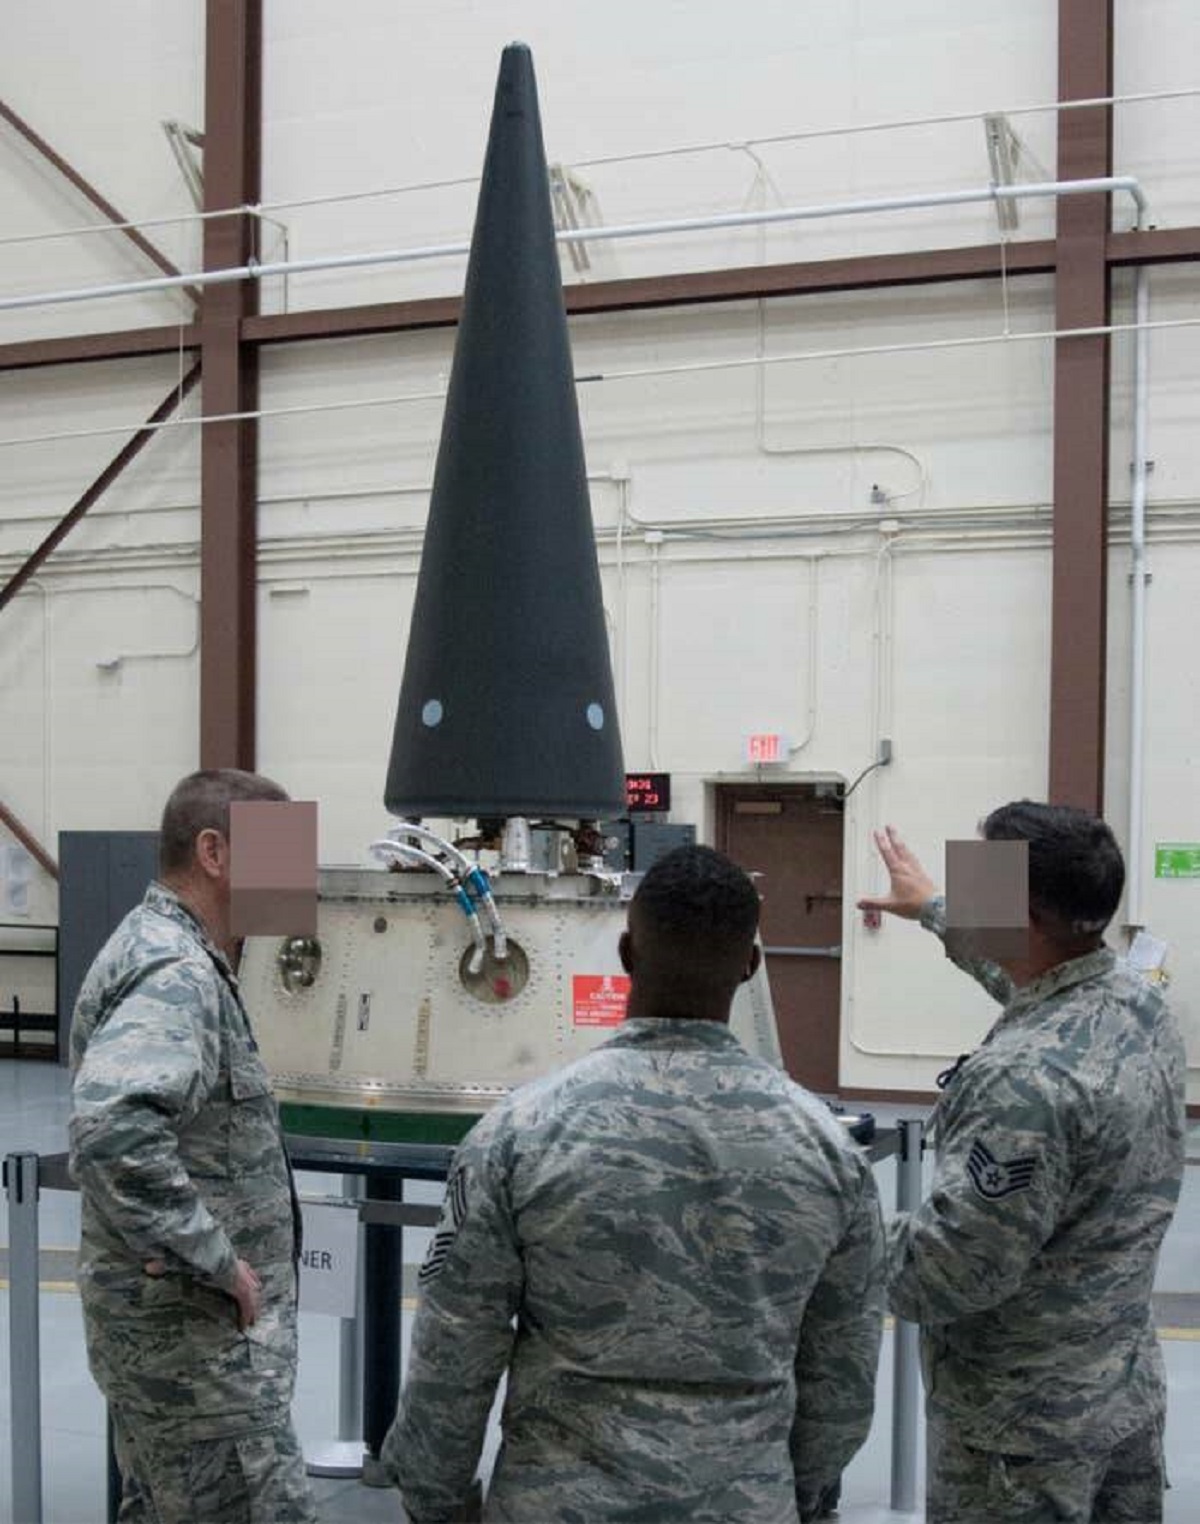 This pointy thing is what a nuclear bomb actually looks like: